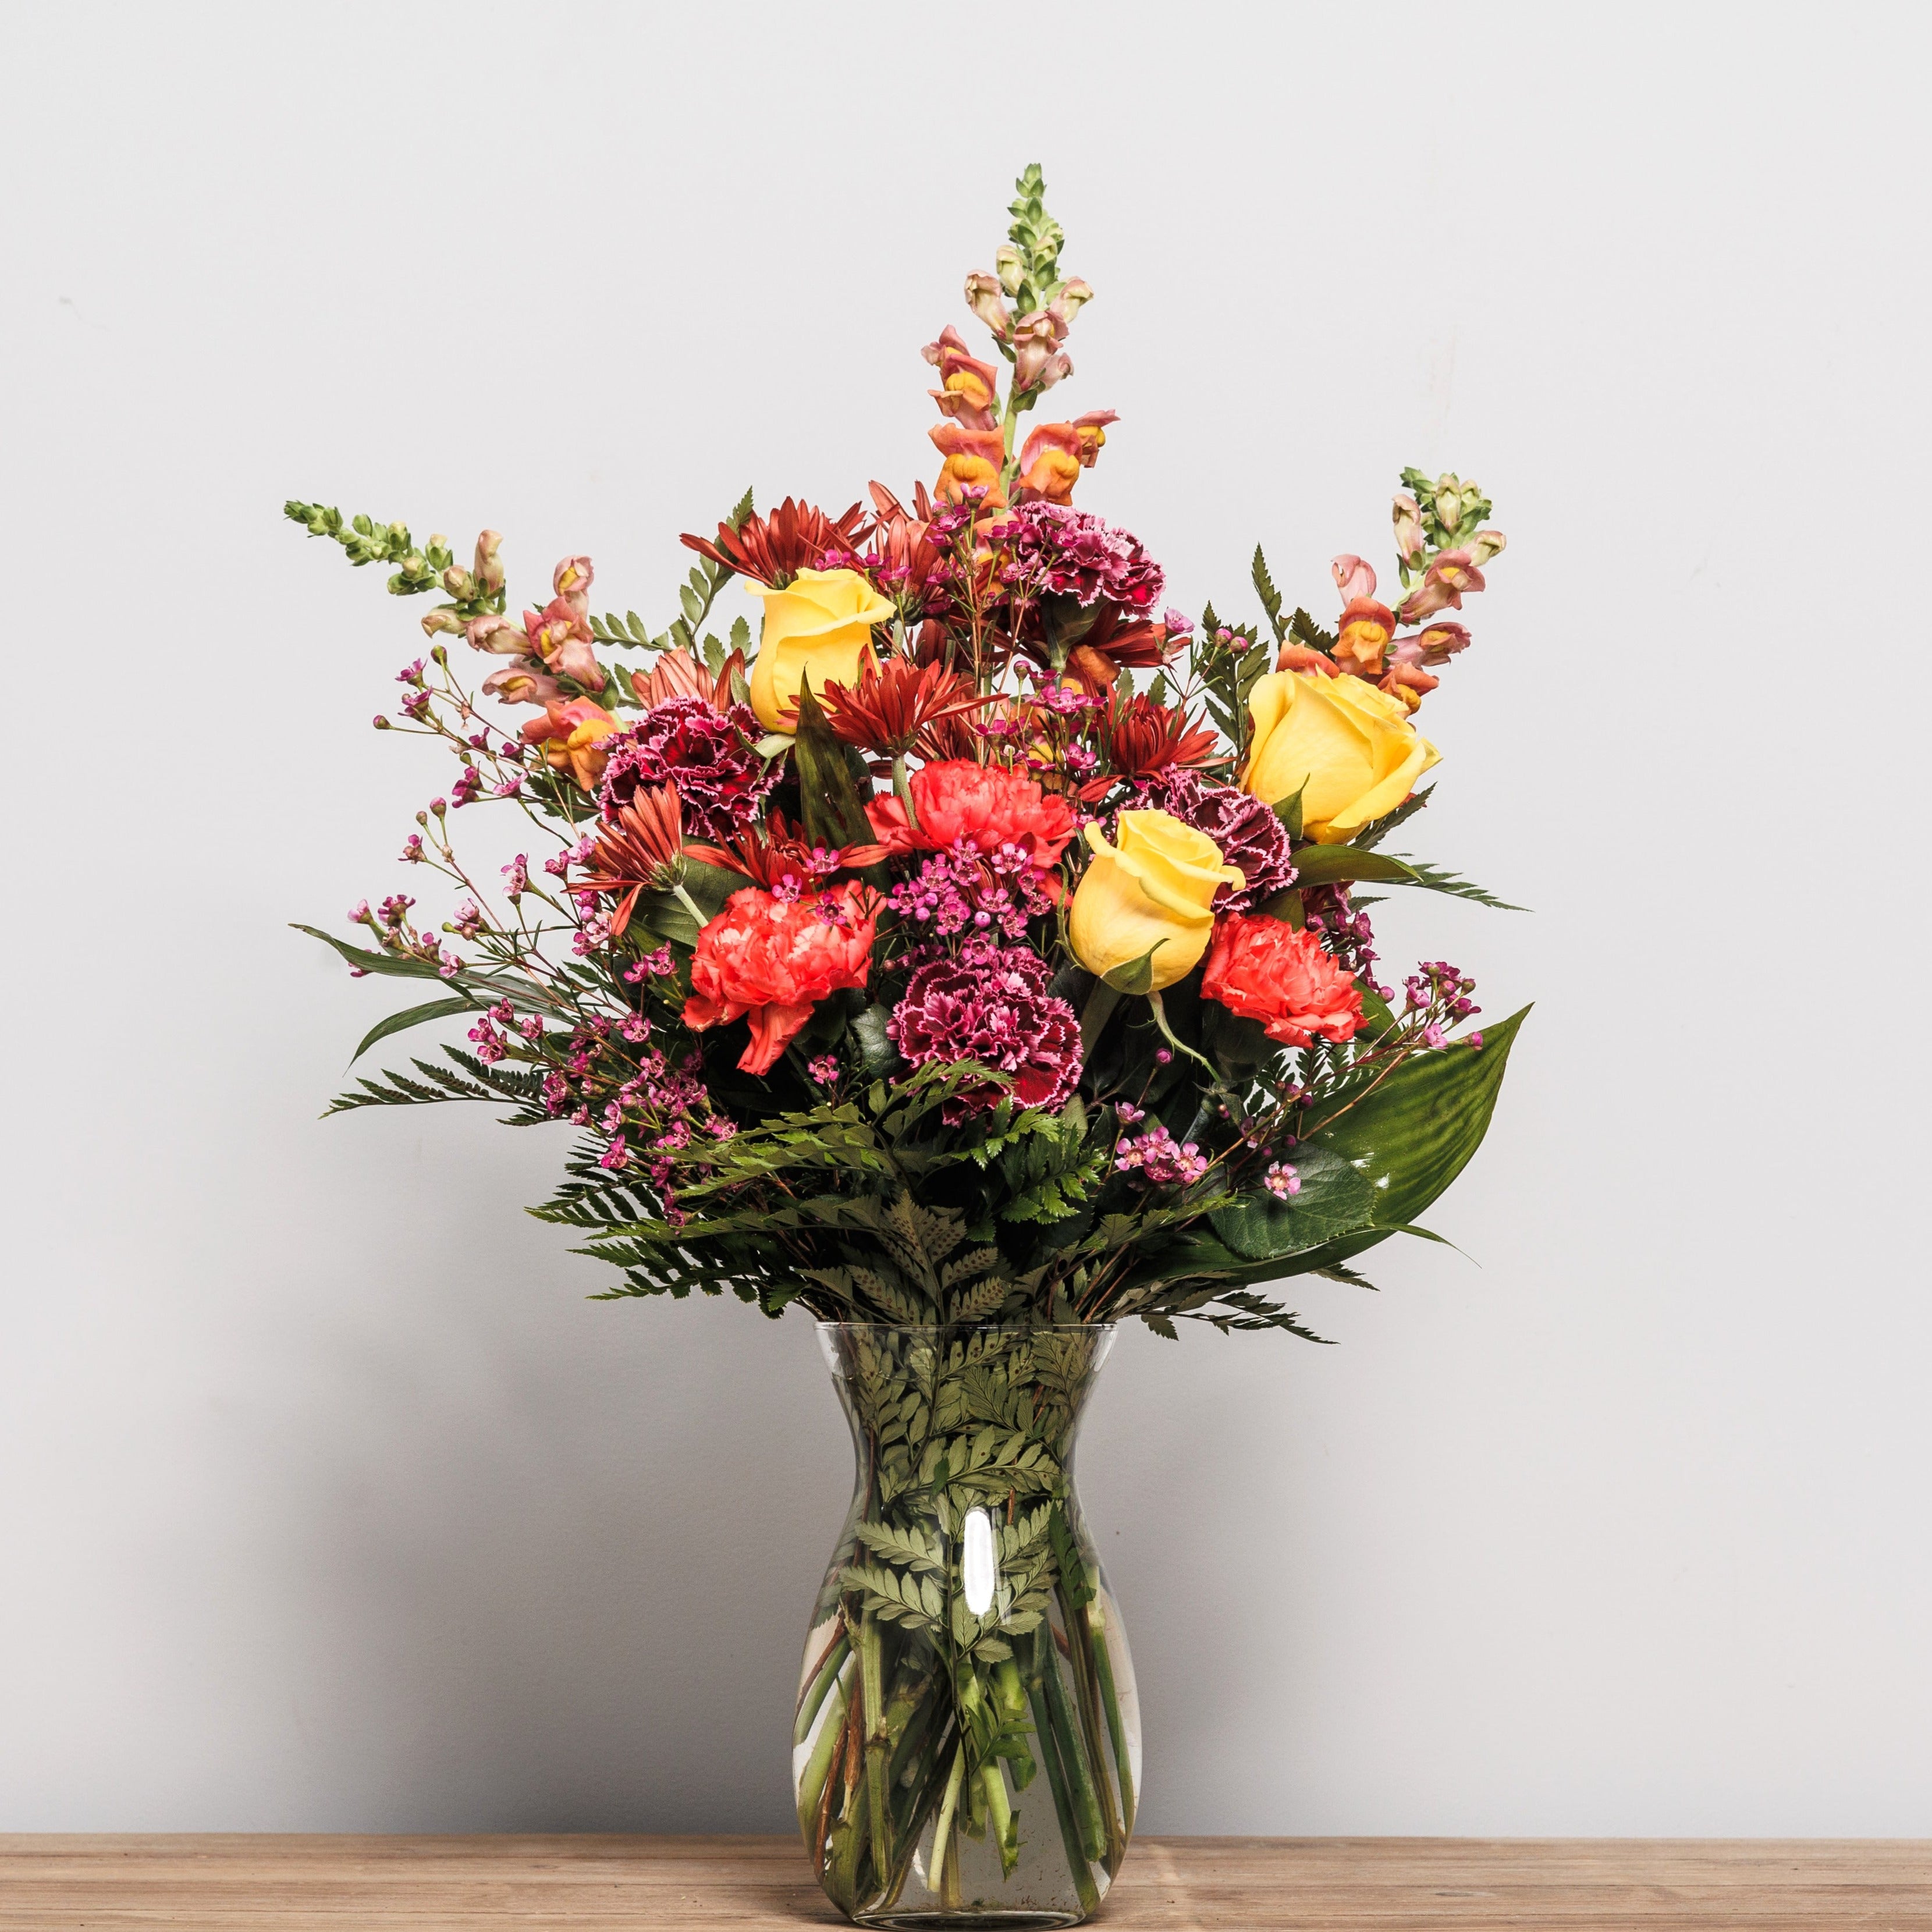 A bold blend of Fall colors in a vase arrangement.